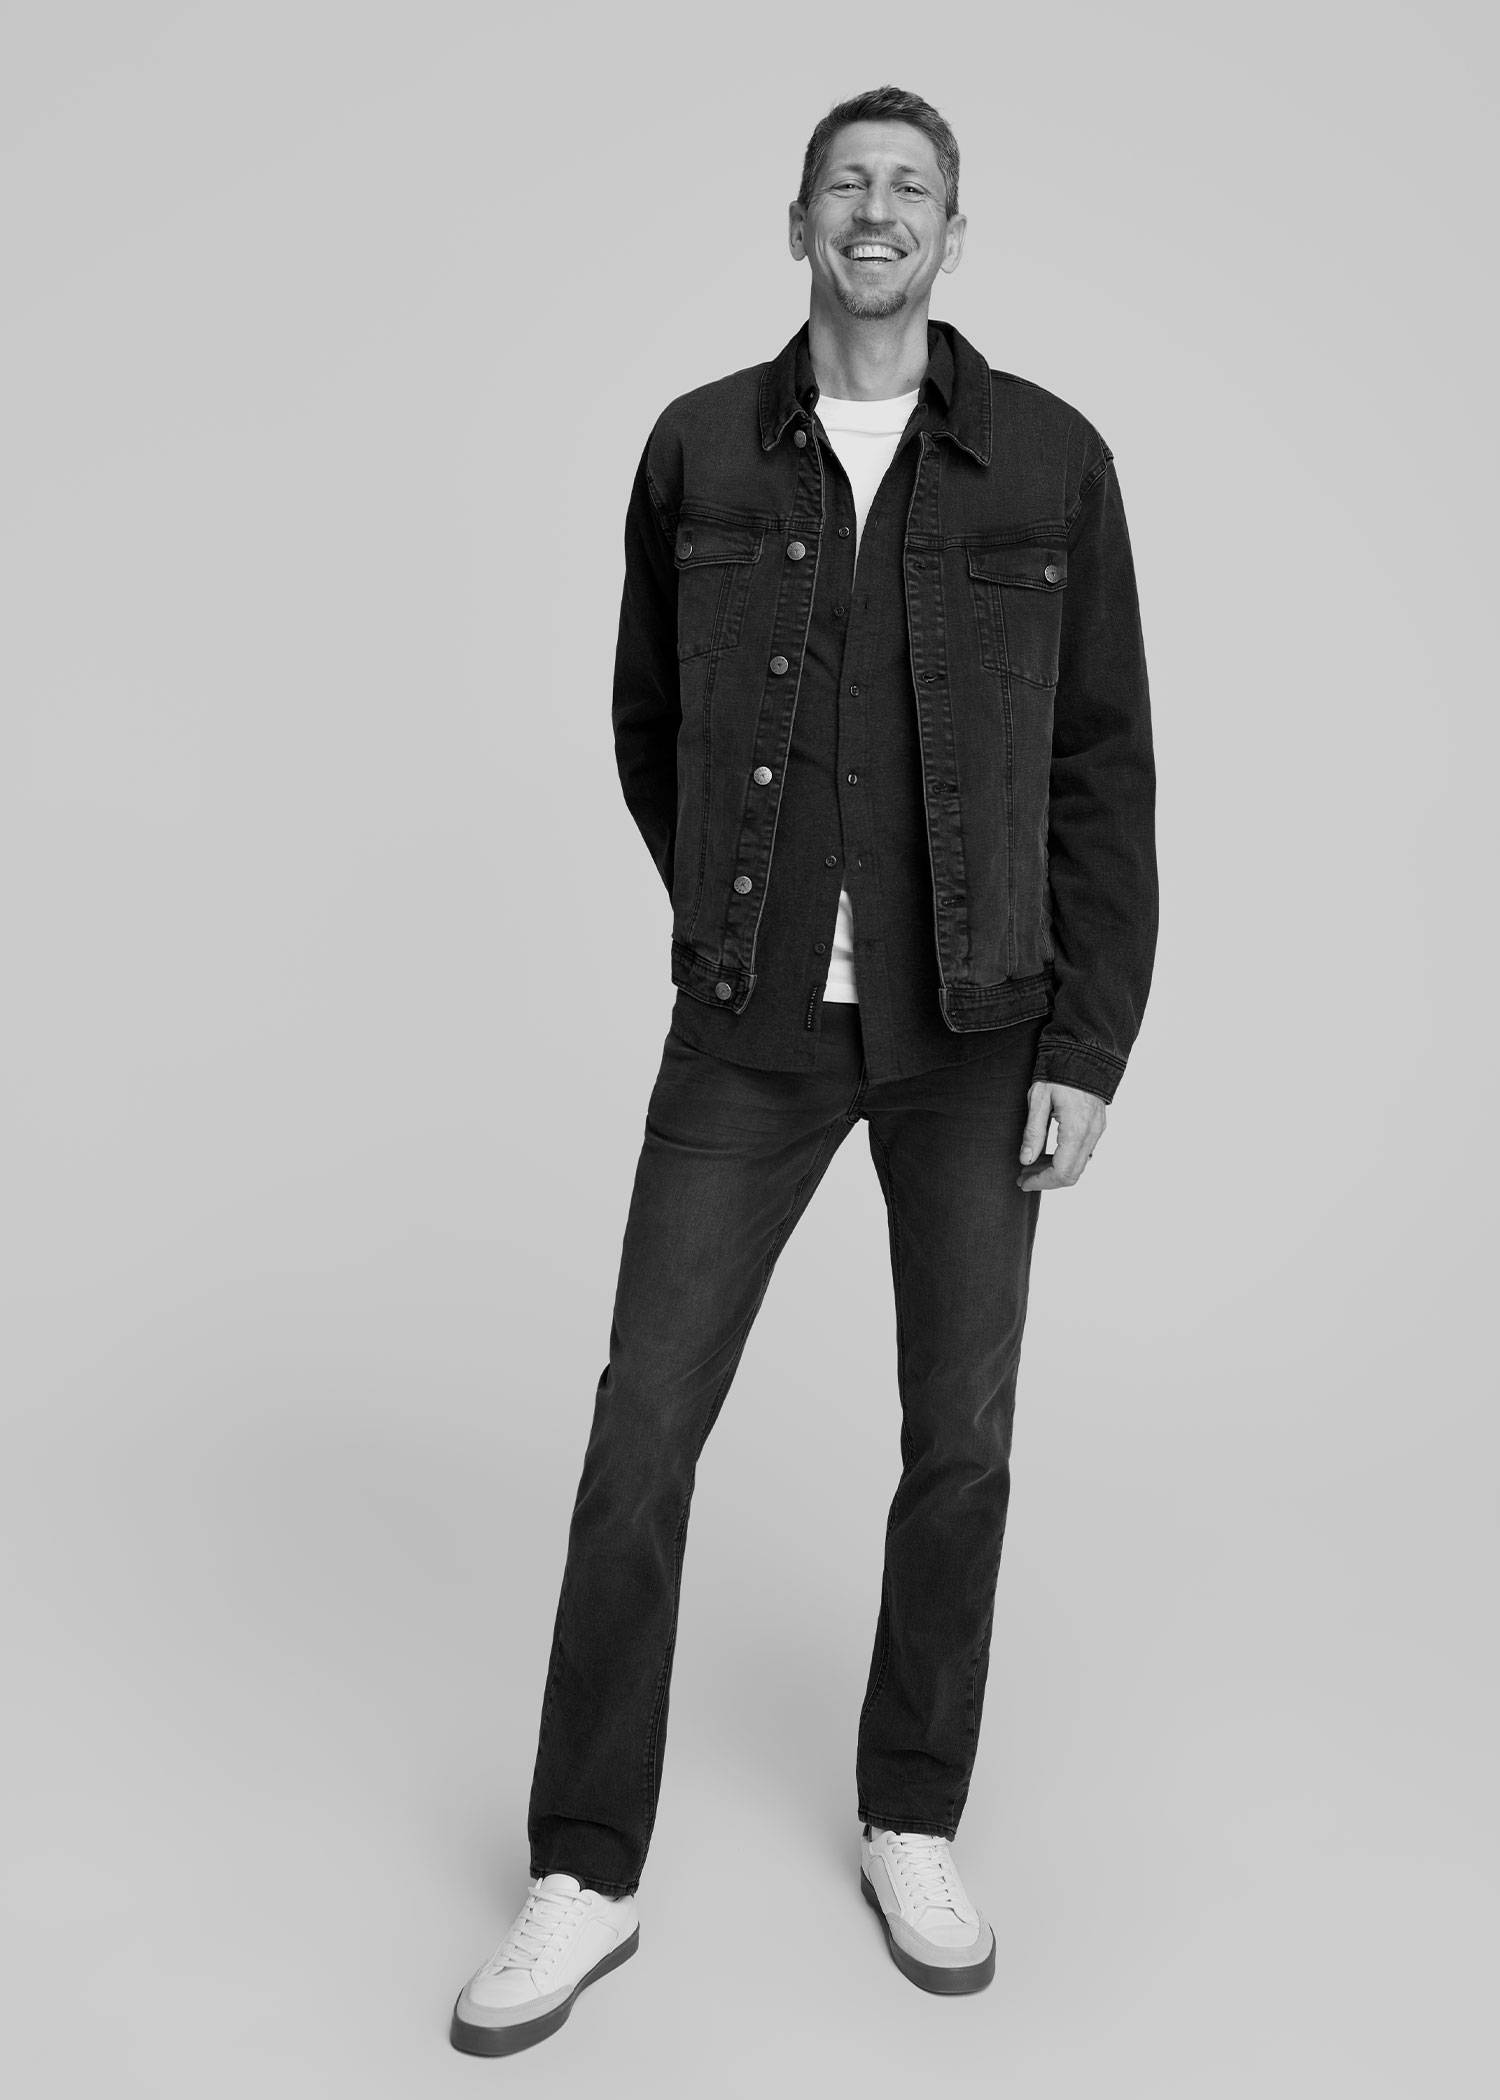 Tall man wearing a black denim jacket and jeans